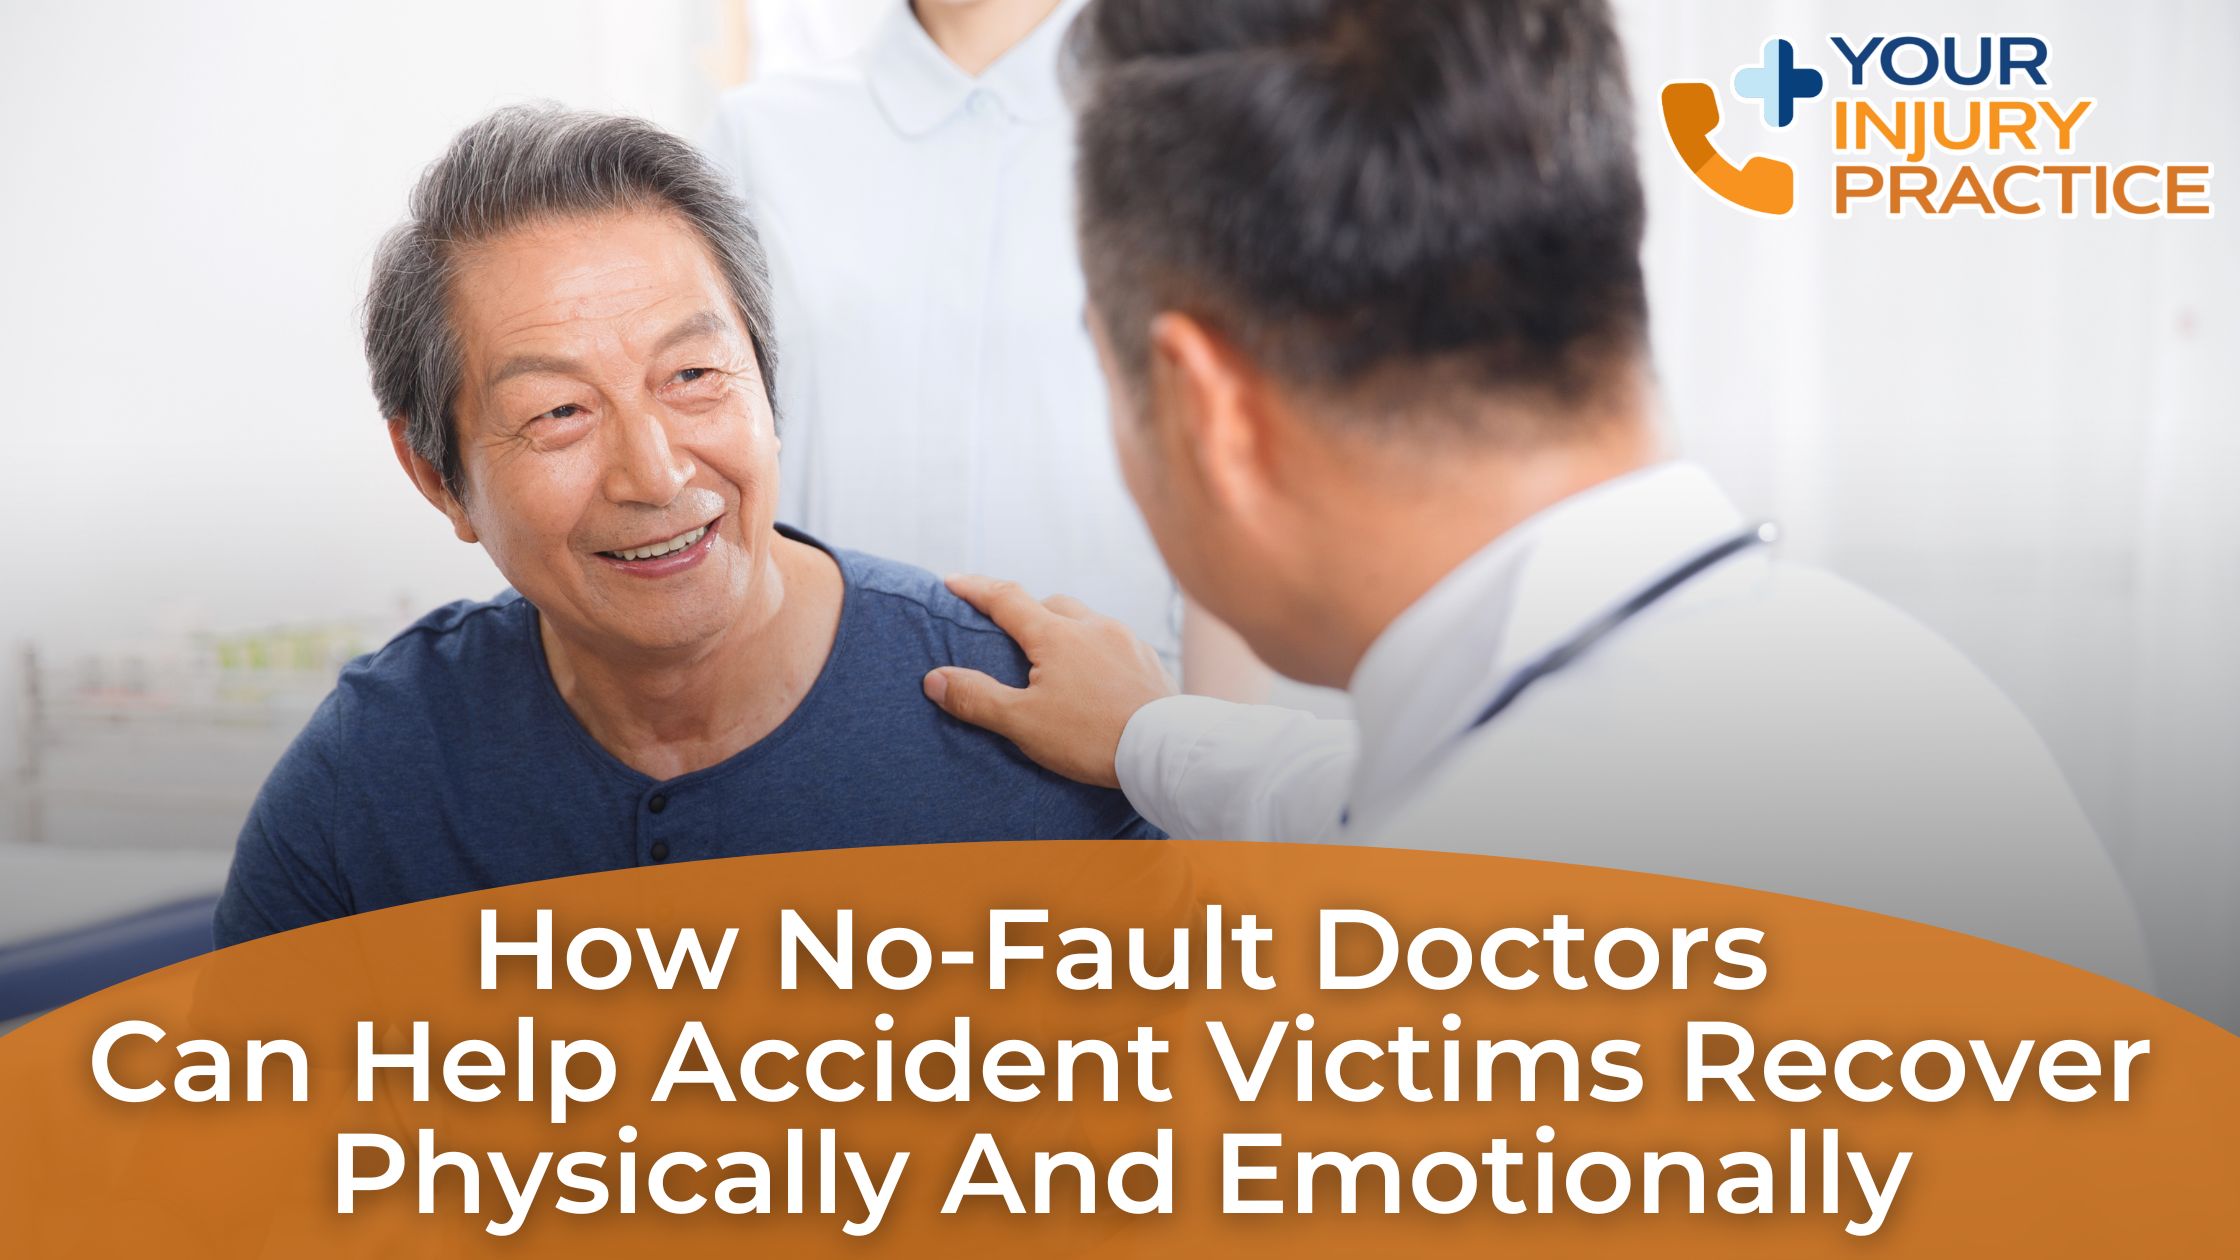 How No-Fault Doctors Can Help Accident Victims Recover Physically and Emotionally